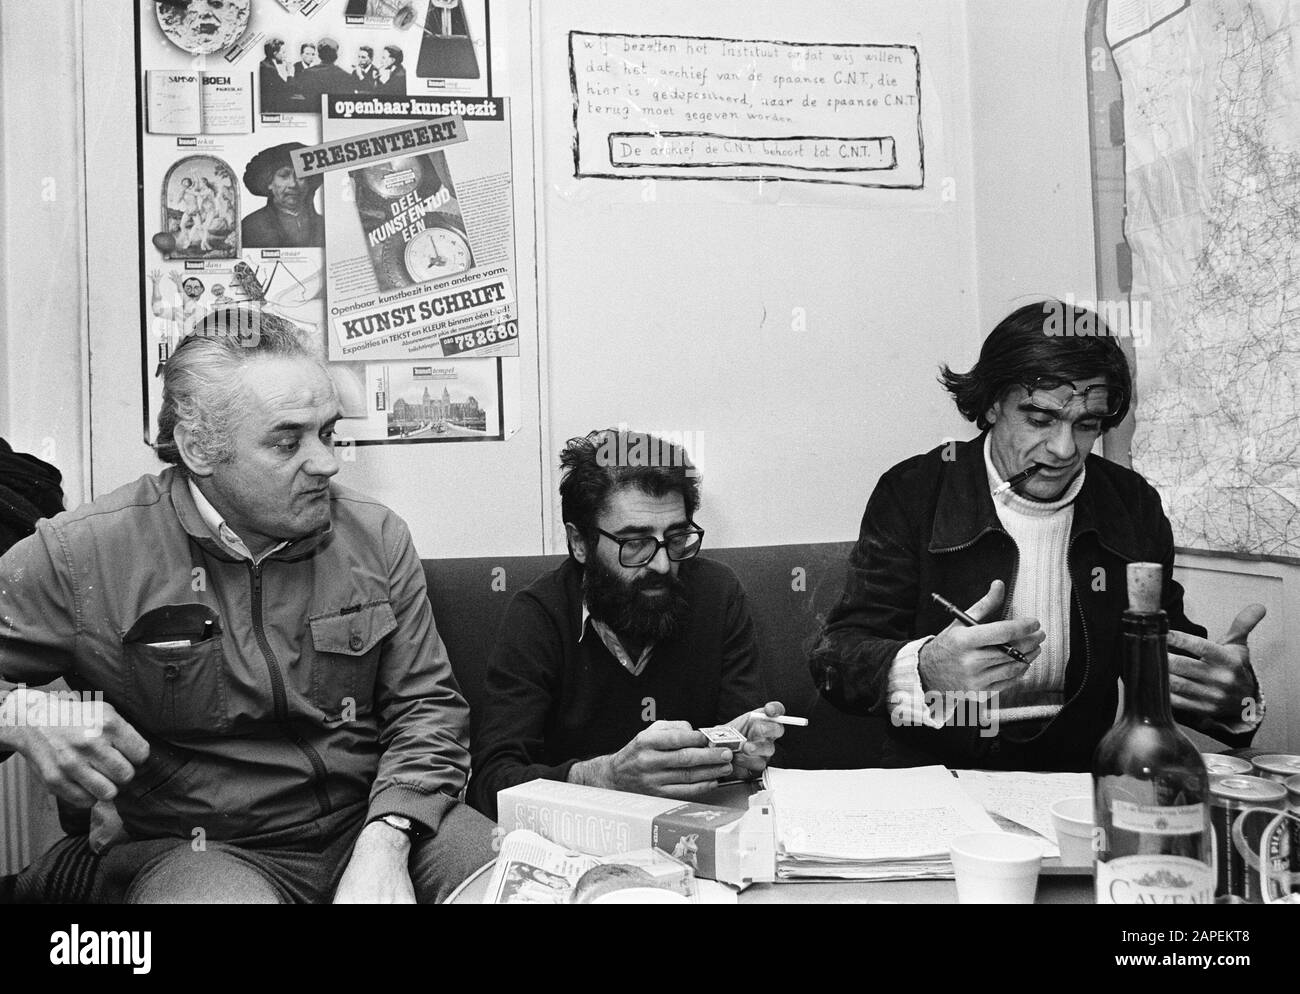 Institute of Social Sciences in Amsterdam occupied Description: Occupied occupiers around a table Date: 19 December 1979 Location: Amsterdam, Noord-Holland Keywords: officials, occupations, junk, students, tables, scientific education Stock Photo